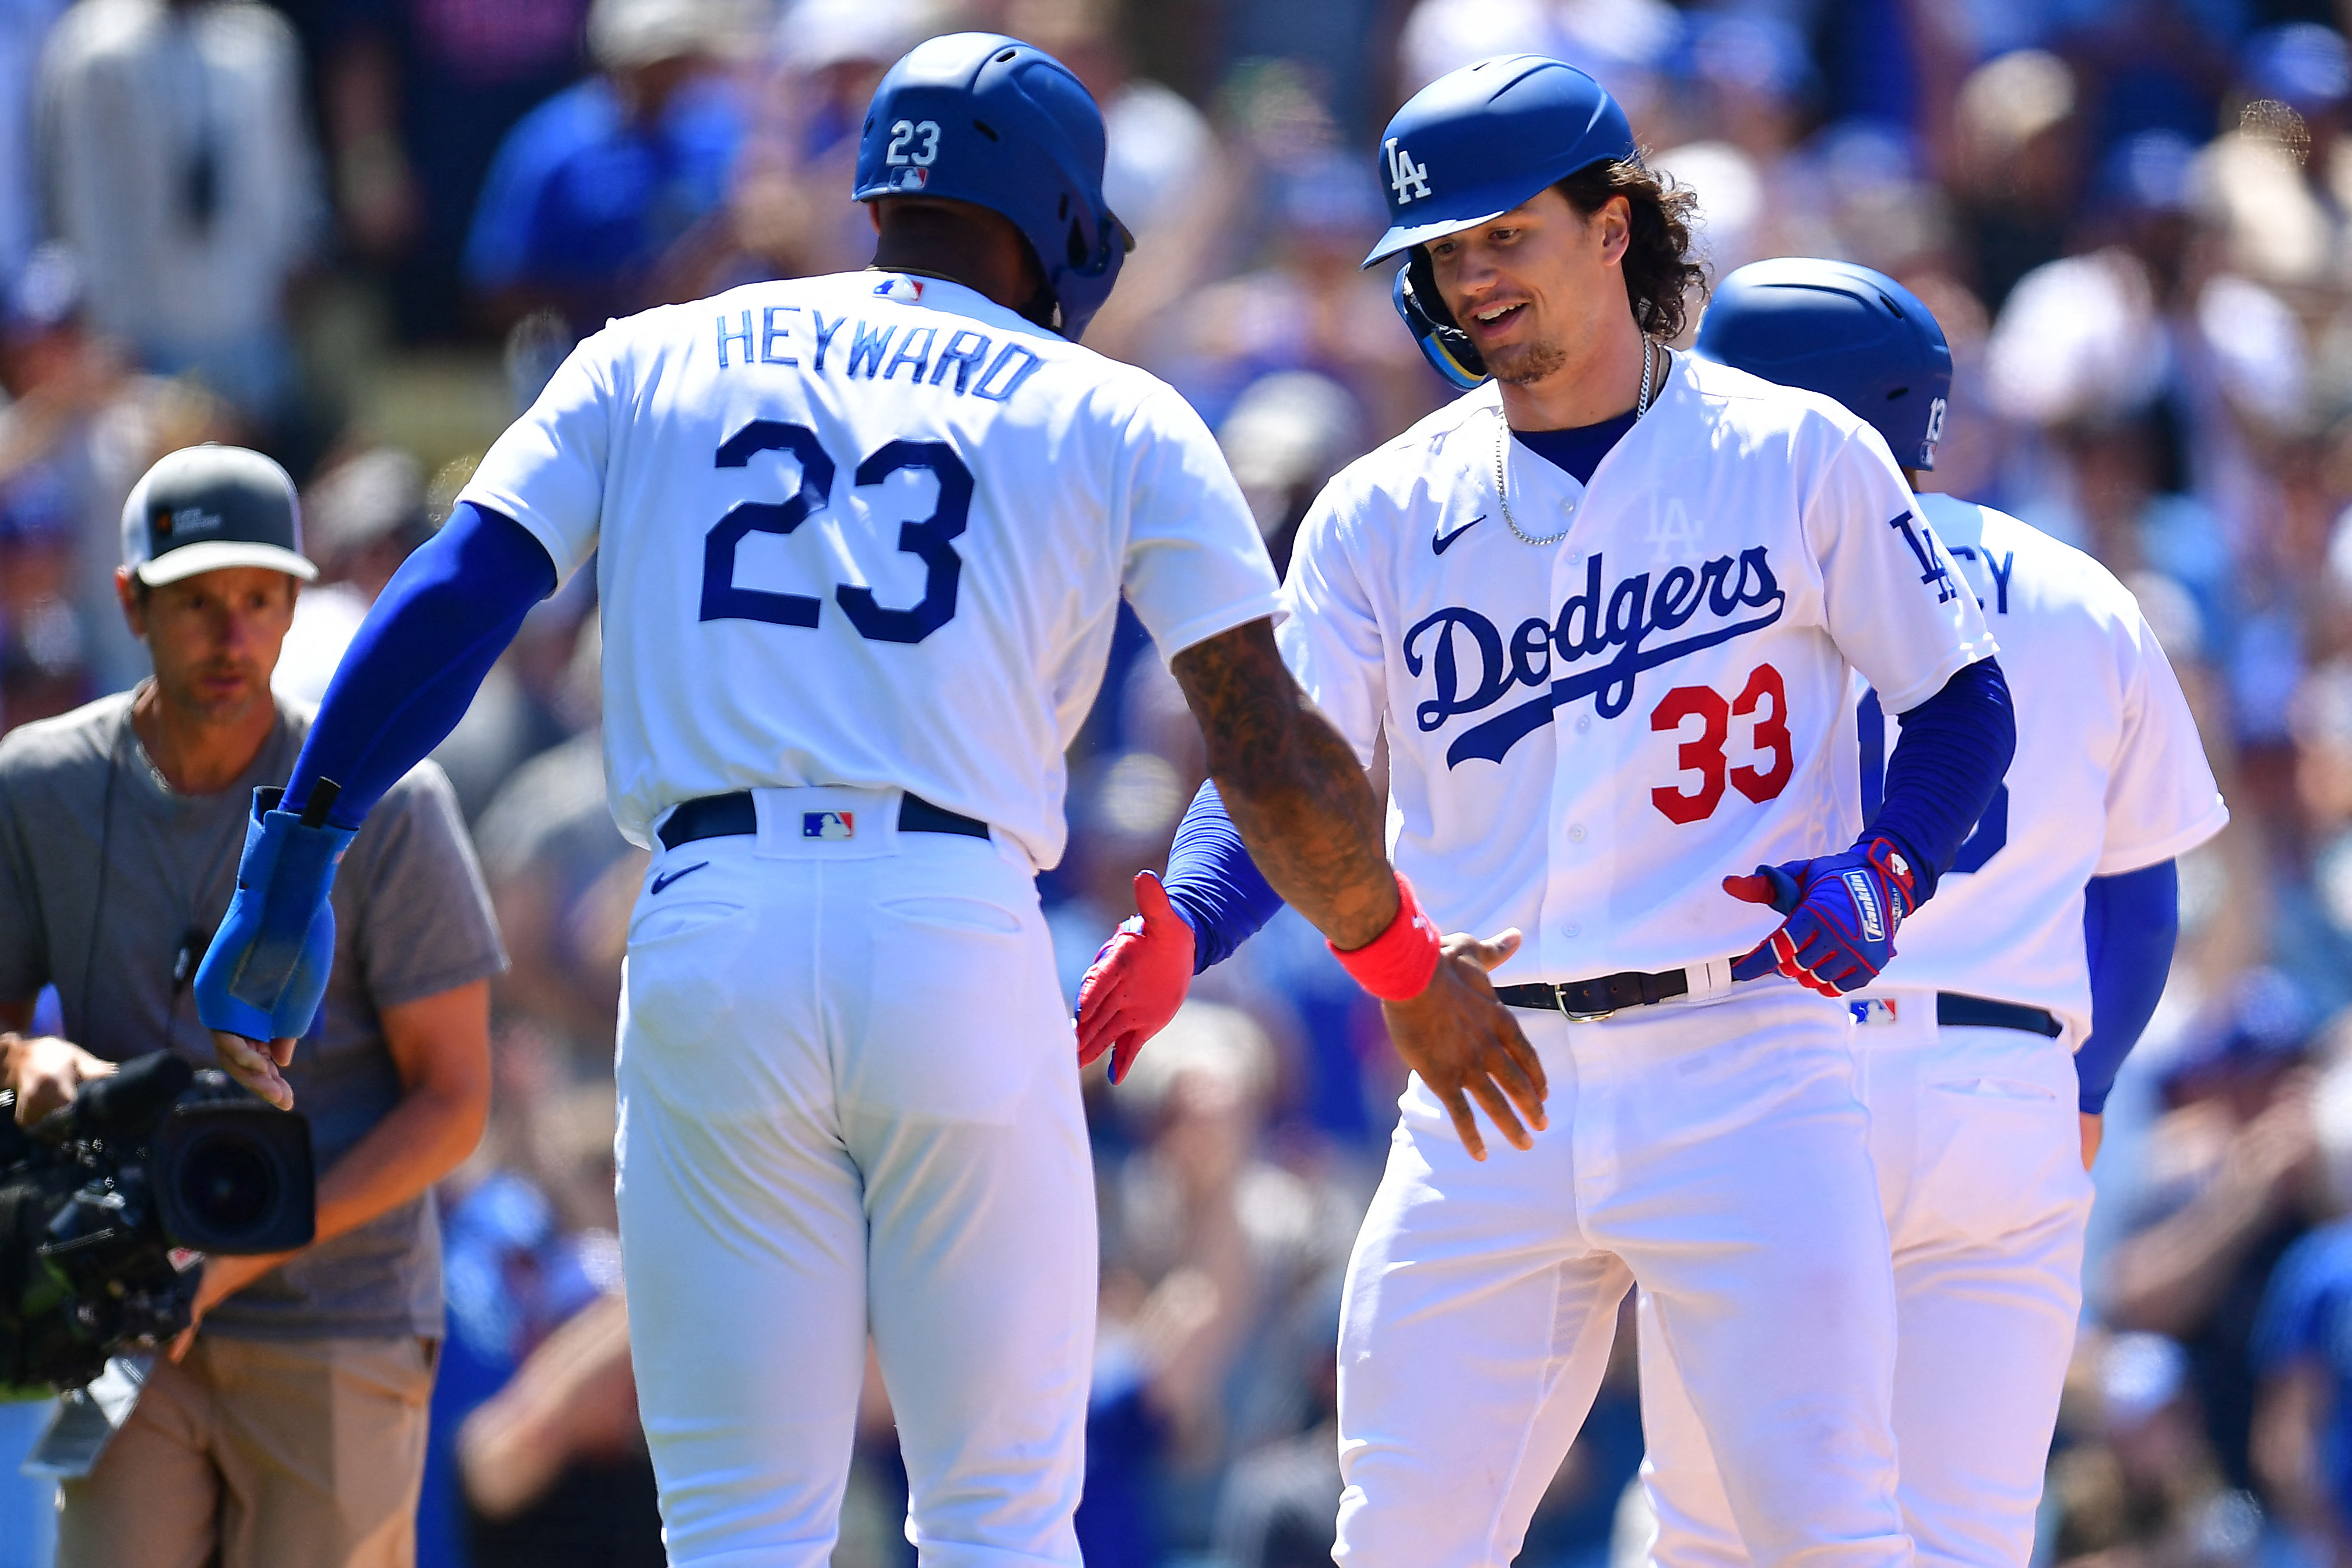 Five-run seventh propels Dodgers to 7-3 win over Twins